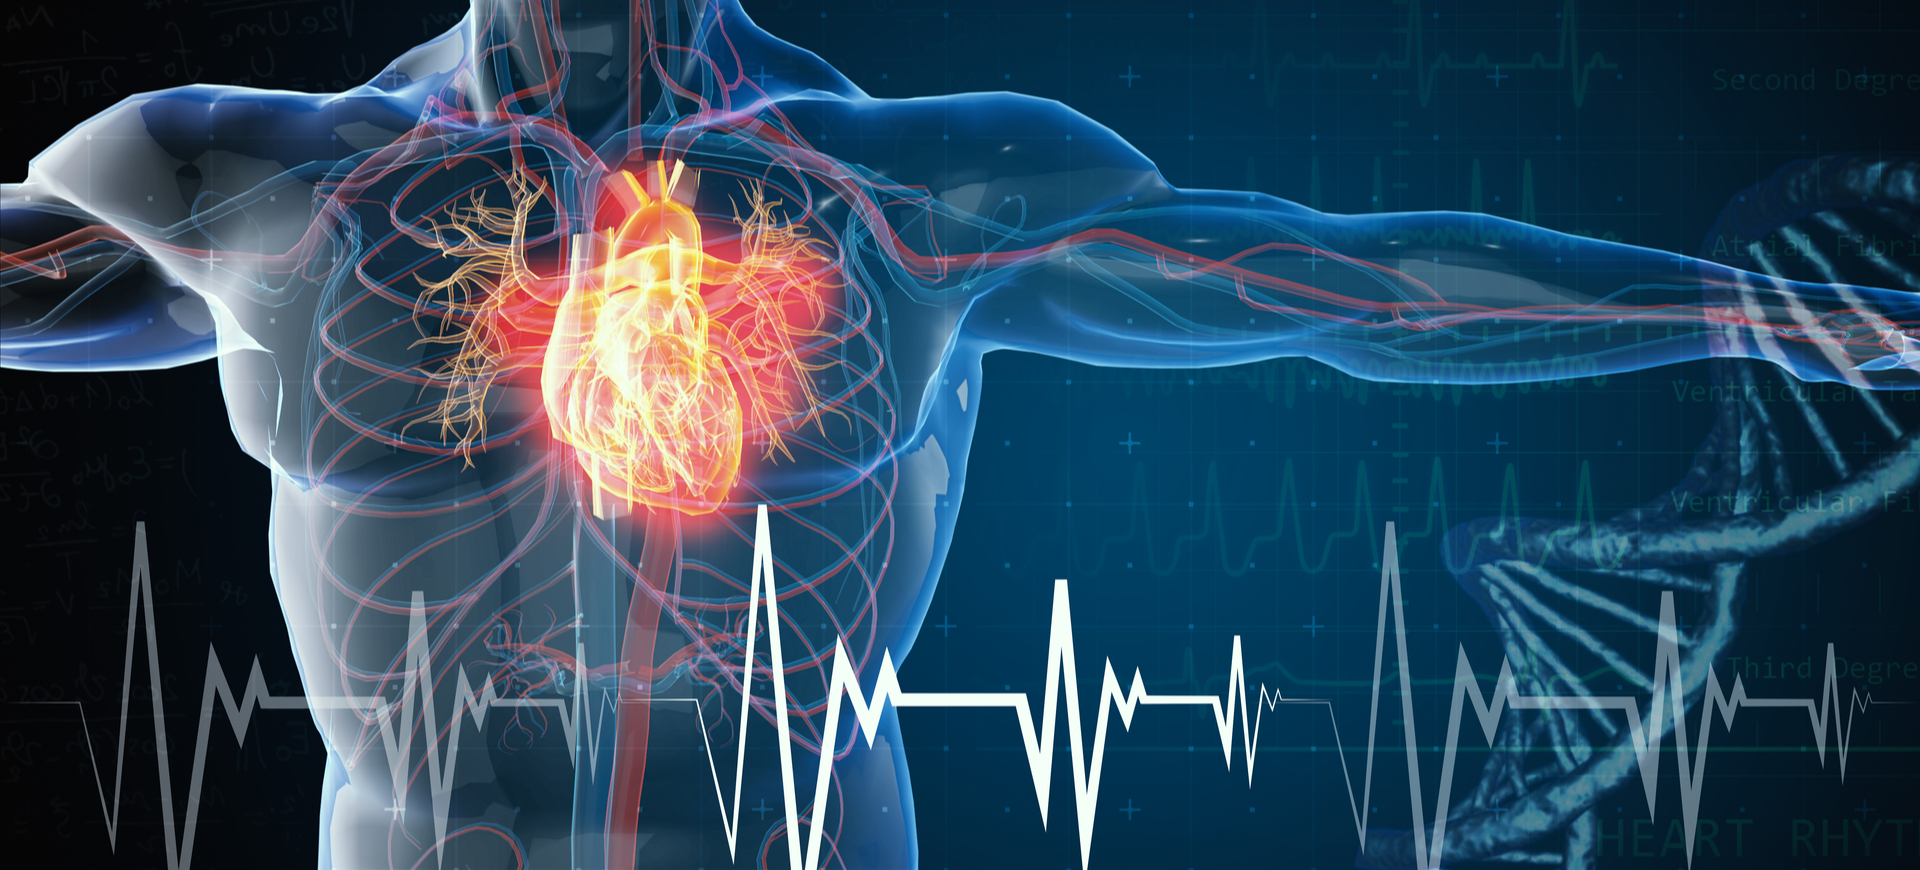 Cardiology Specialists in Mumbai, Cardiology Physicians, Heart Specialist in Mumbai, Heart Doctor Near Me, Heart Specialist Doctor, Cardiac Doctor Near Me